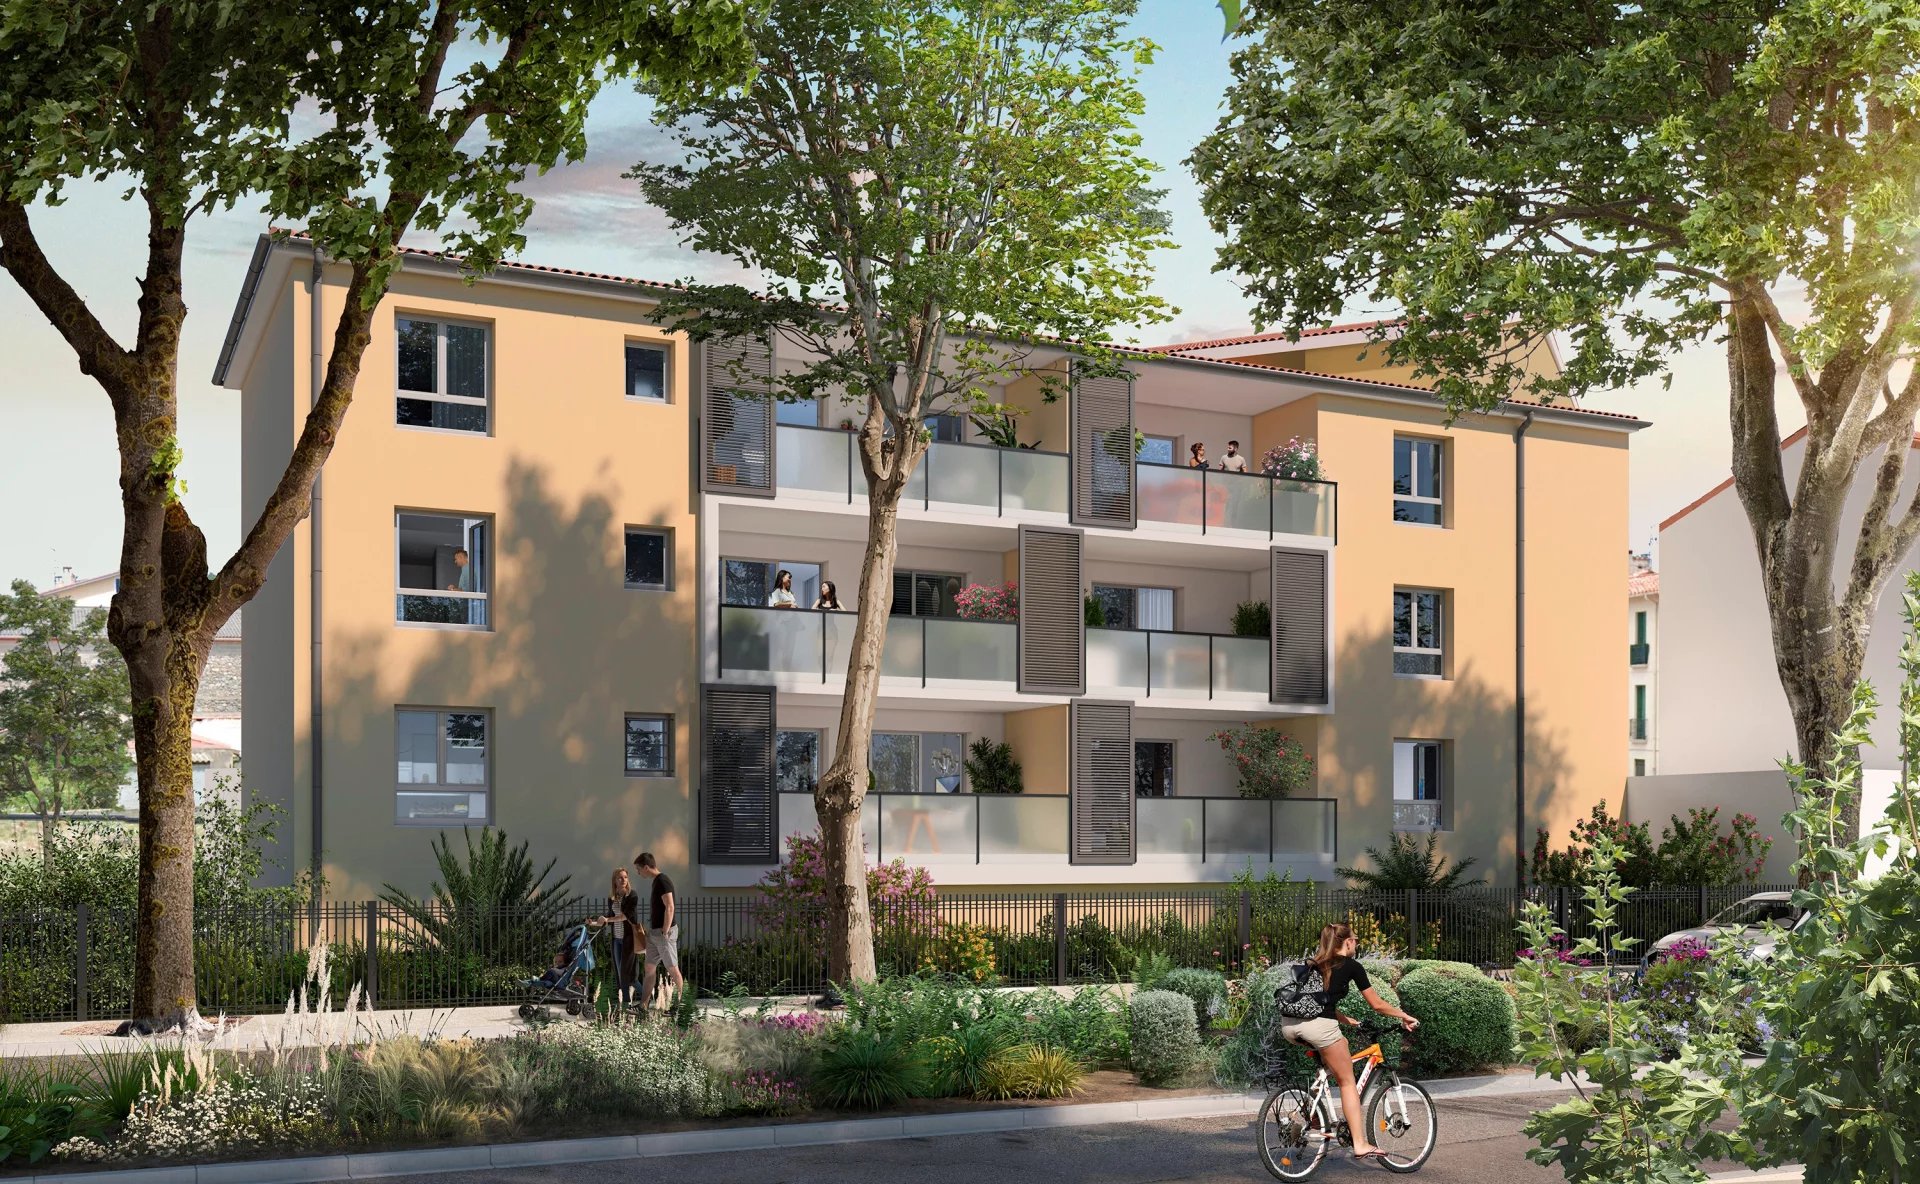 OFF-PLAN 2-BED APPARTMENT (LOT 302), RESIDENCE L'ANGLE DES ARTS, CERET